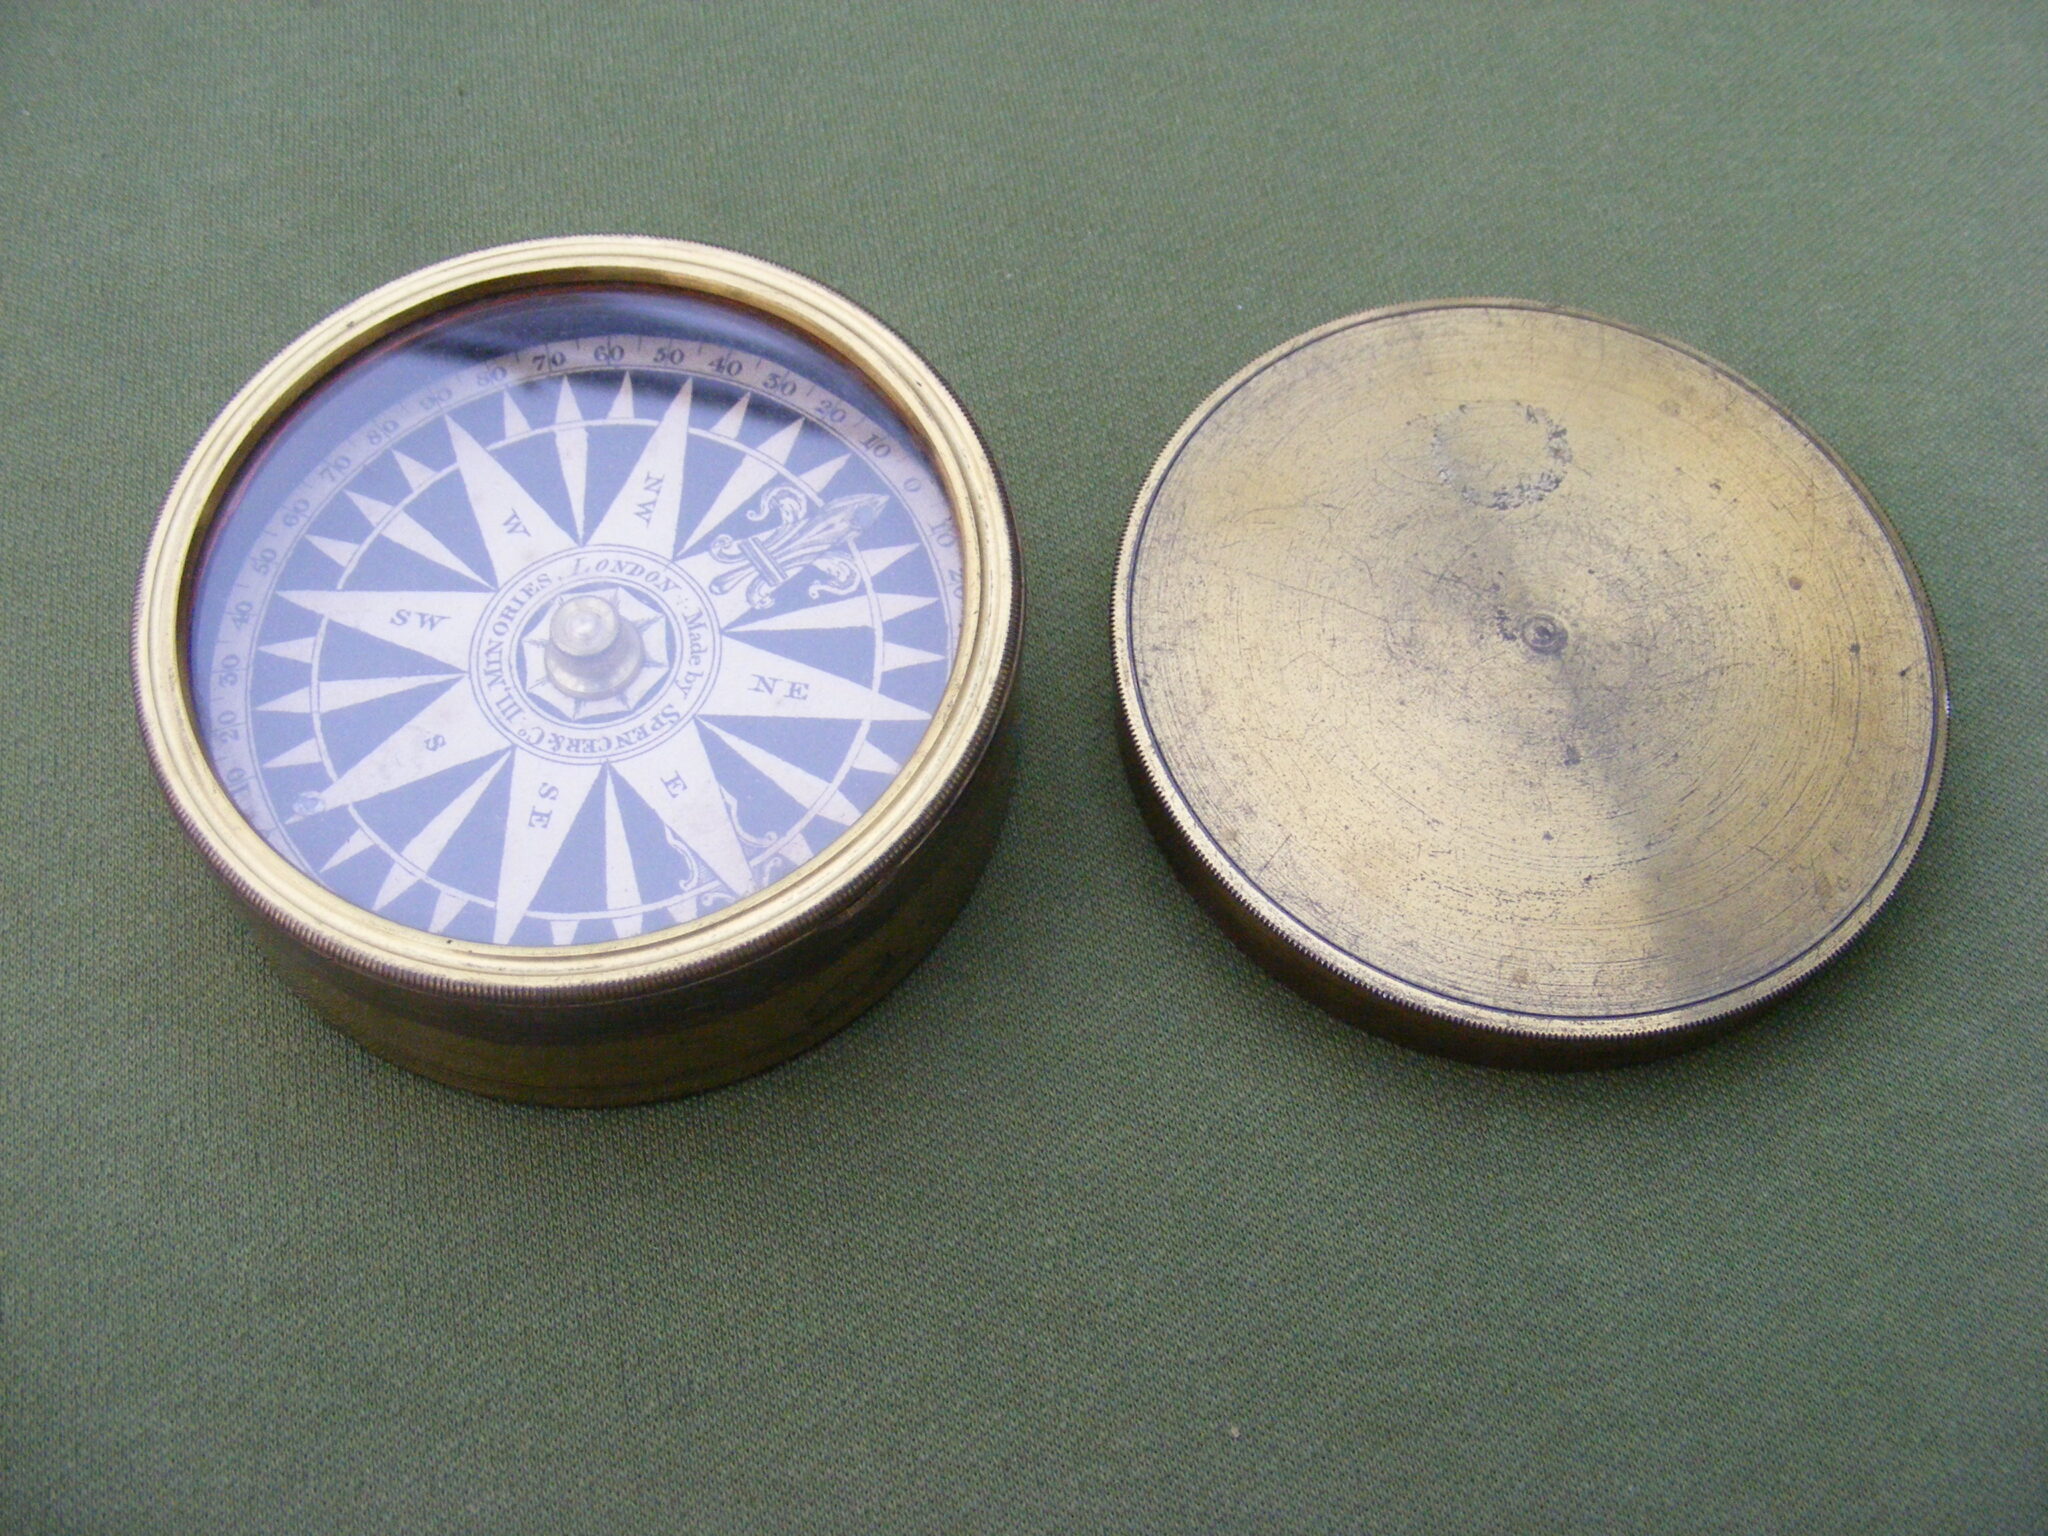 MARINERS COMPASS BY SPENCER & CO.